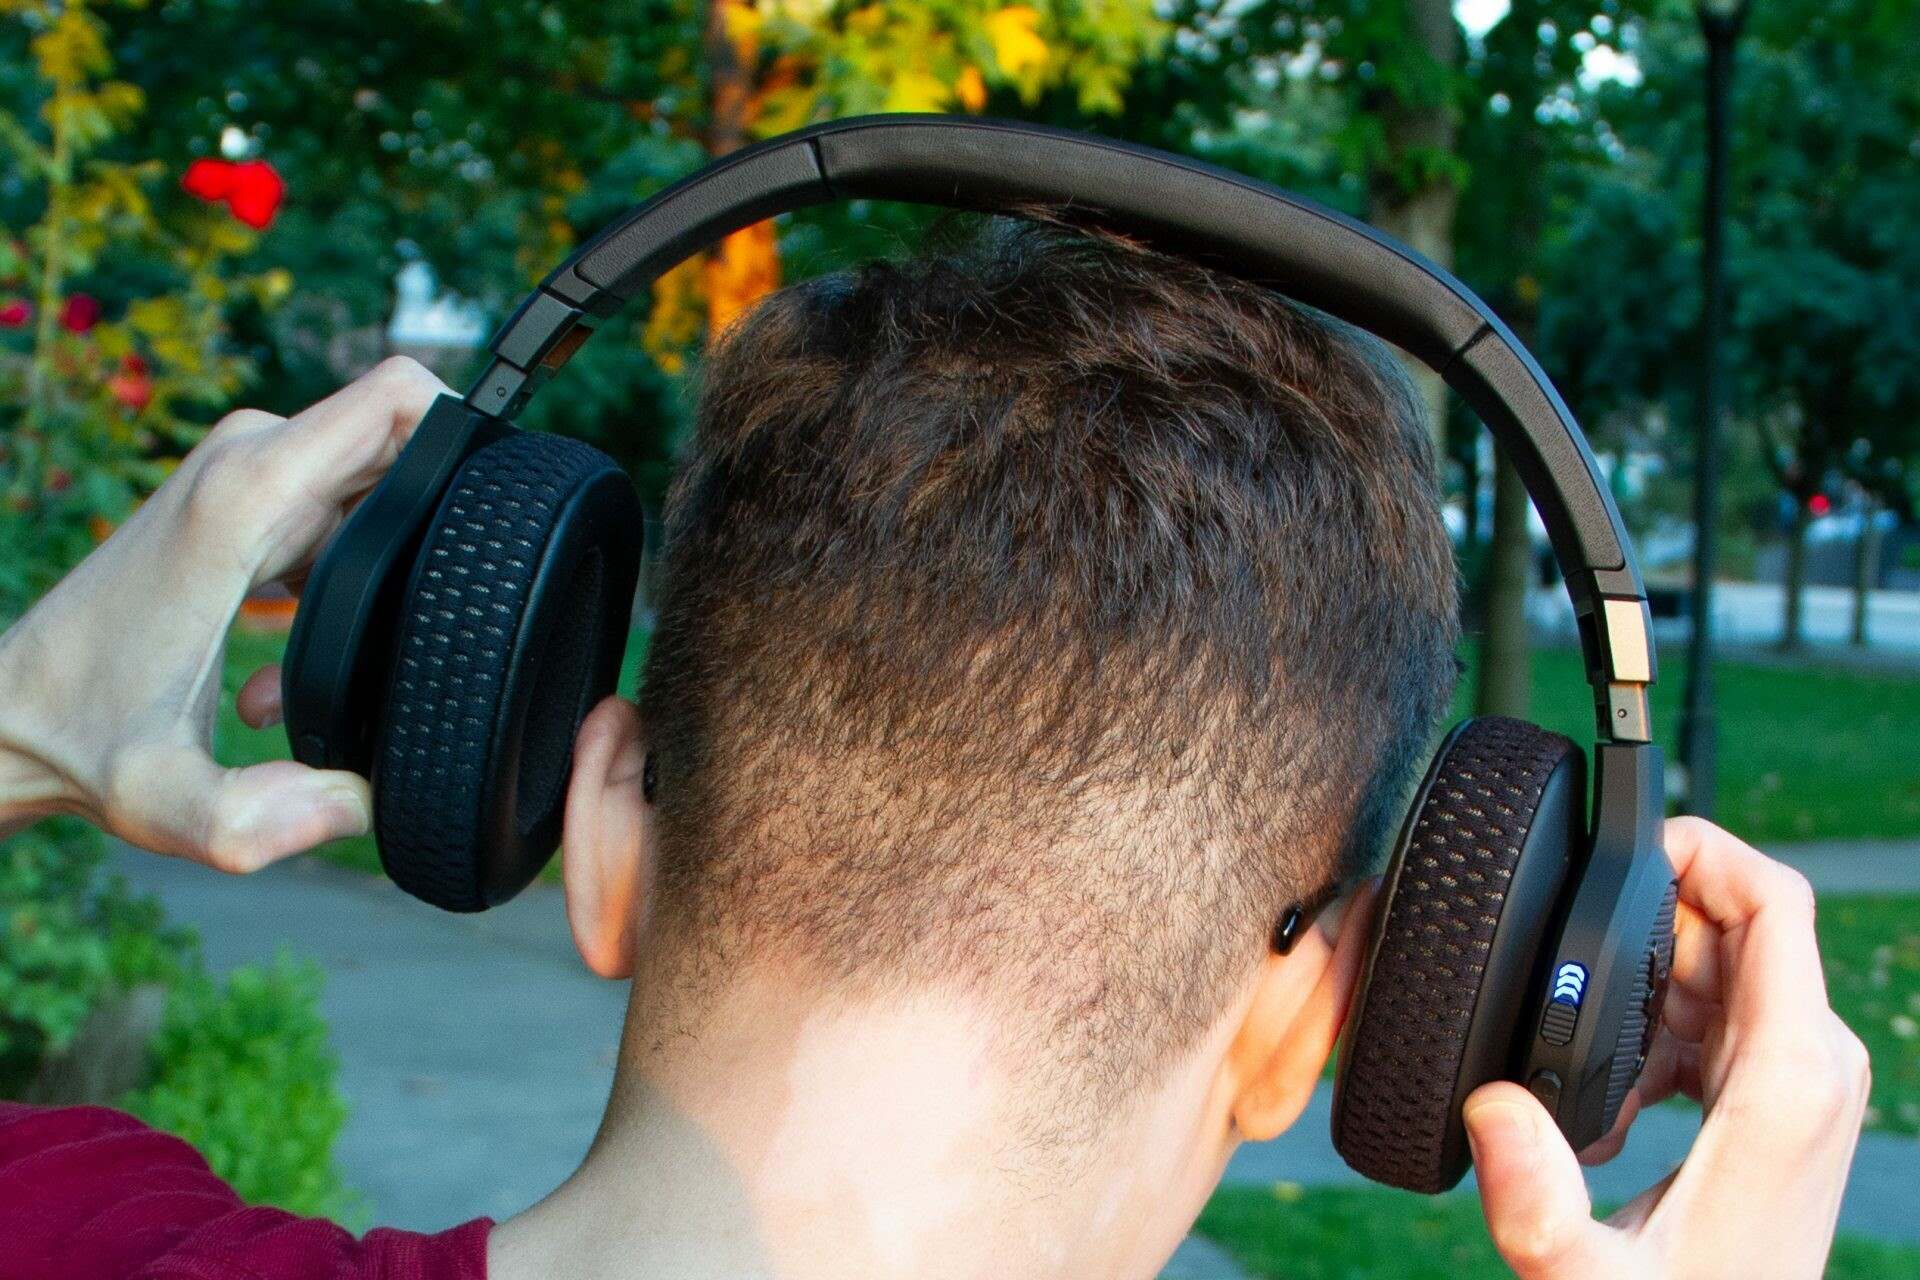 reducing-background-noise-in-headsets-effective-techniques